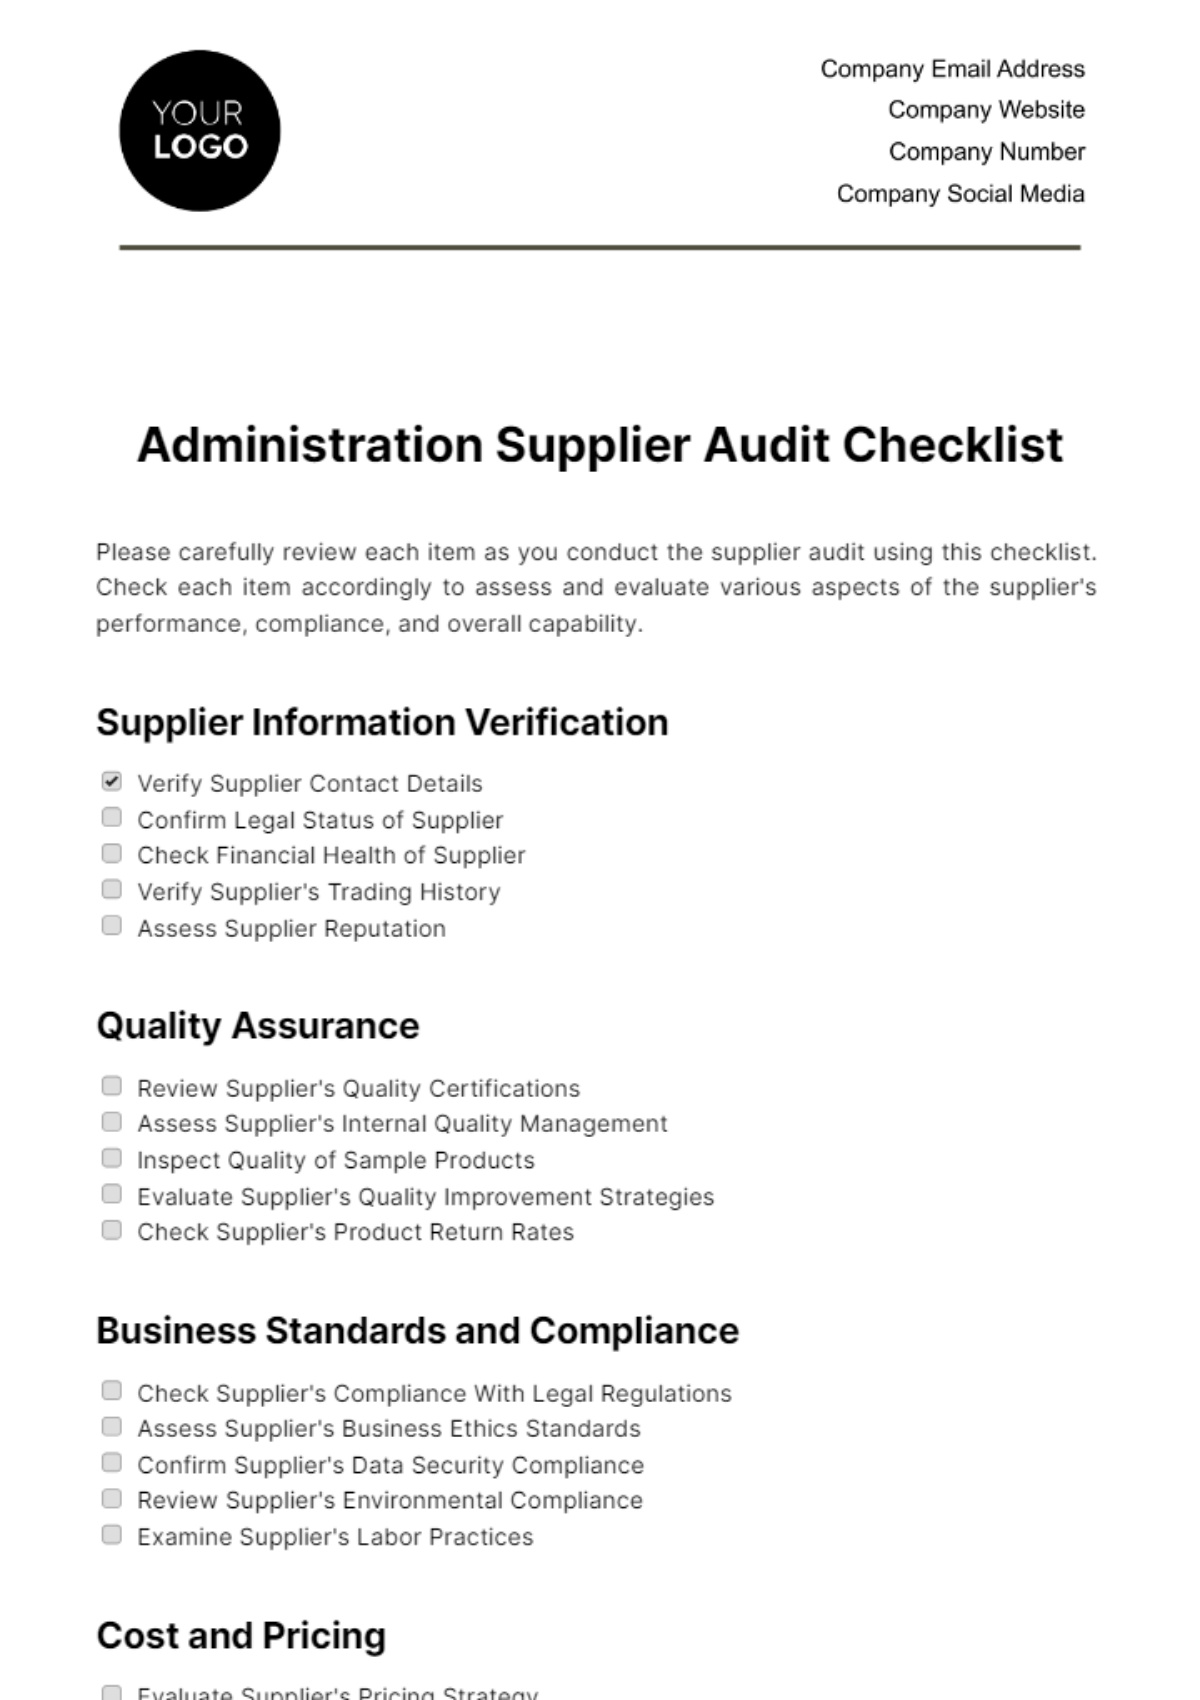 Free Administration Supplier Audit Checklist Template